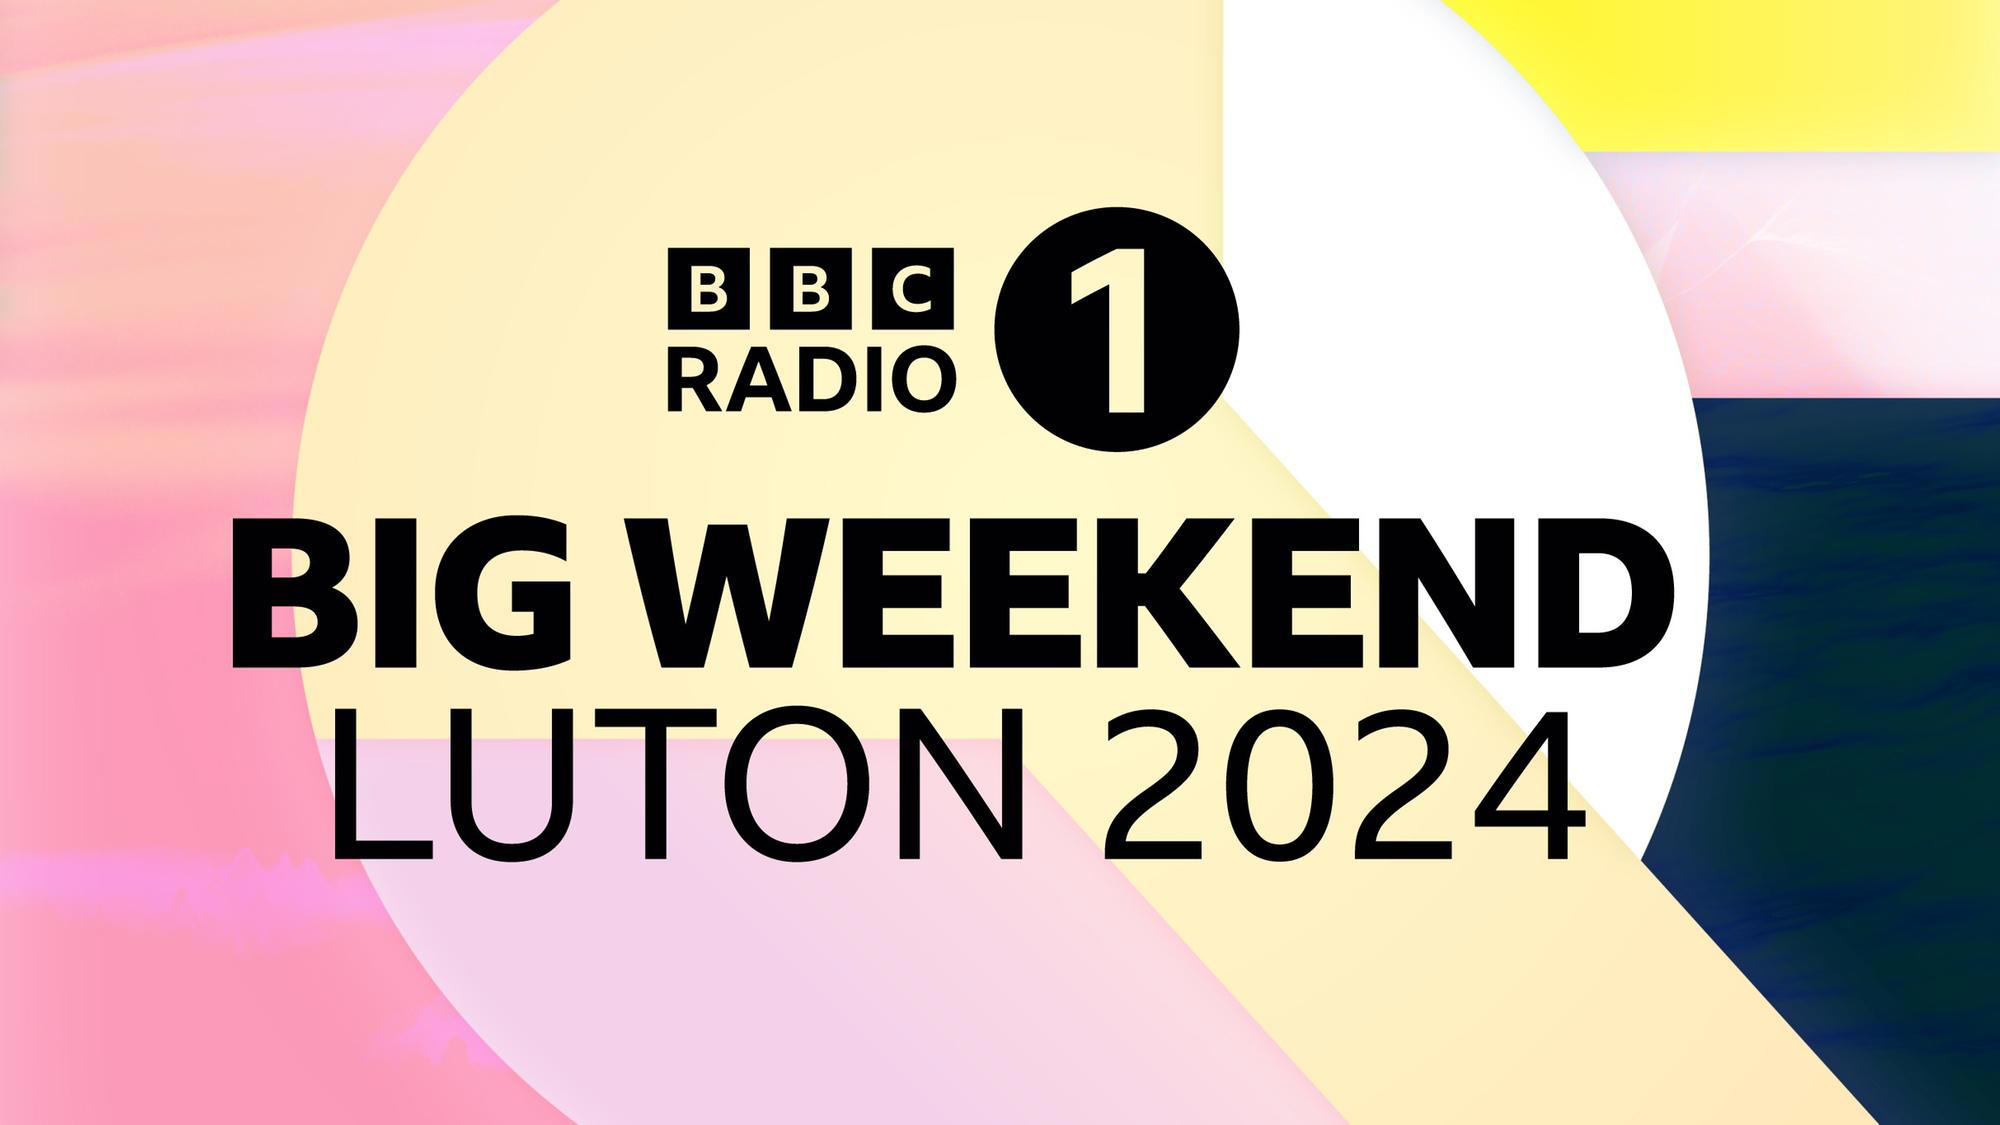 BBC Radio 1’s Big Weekend is coming to Luton's Stockwood Park this May